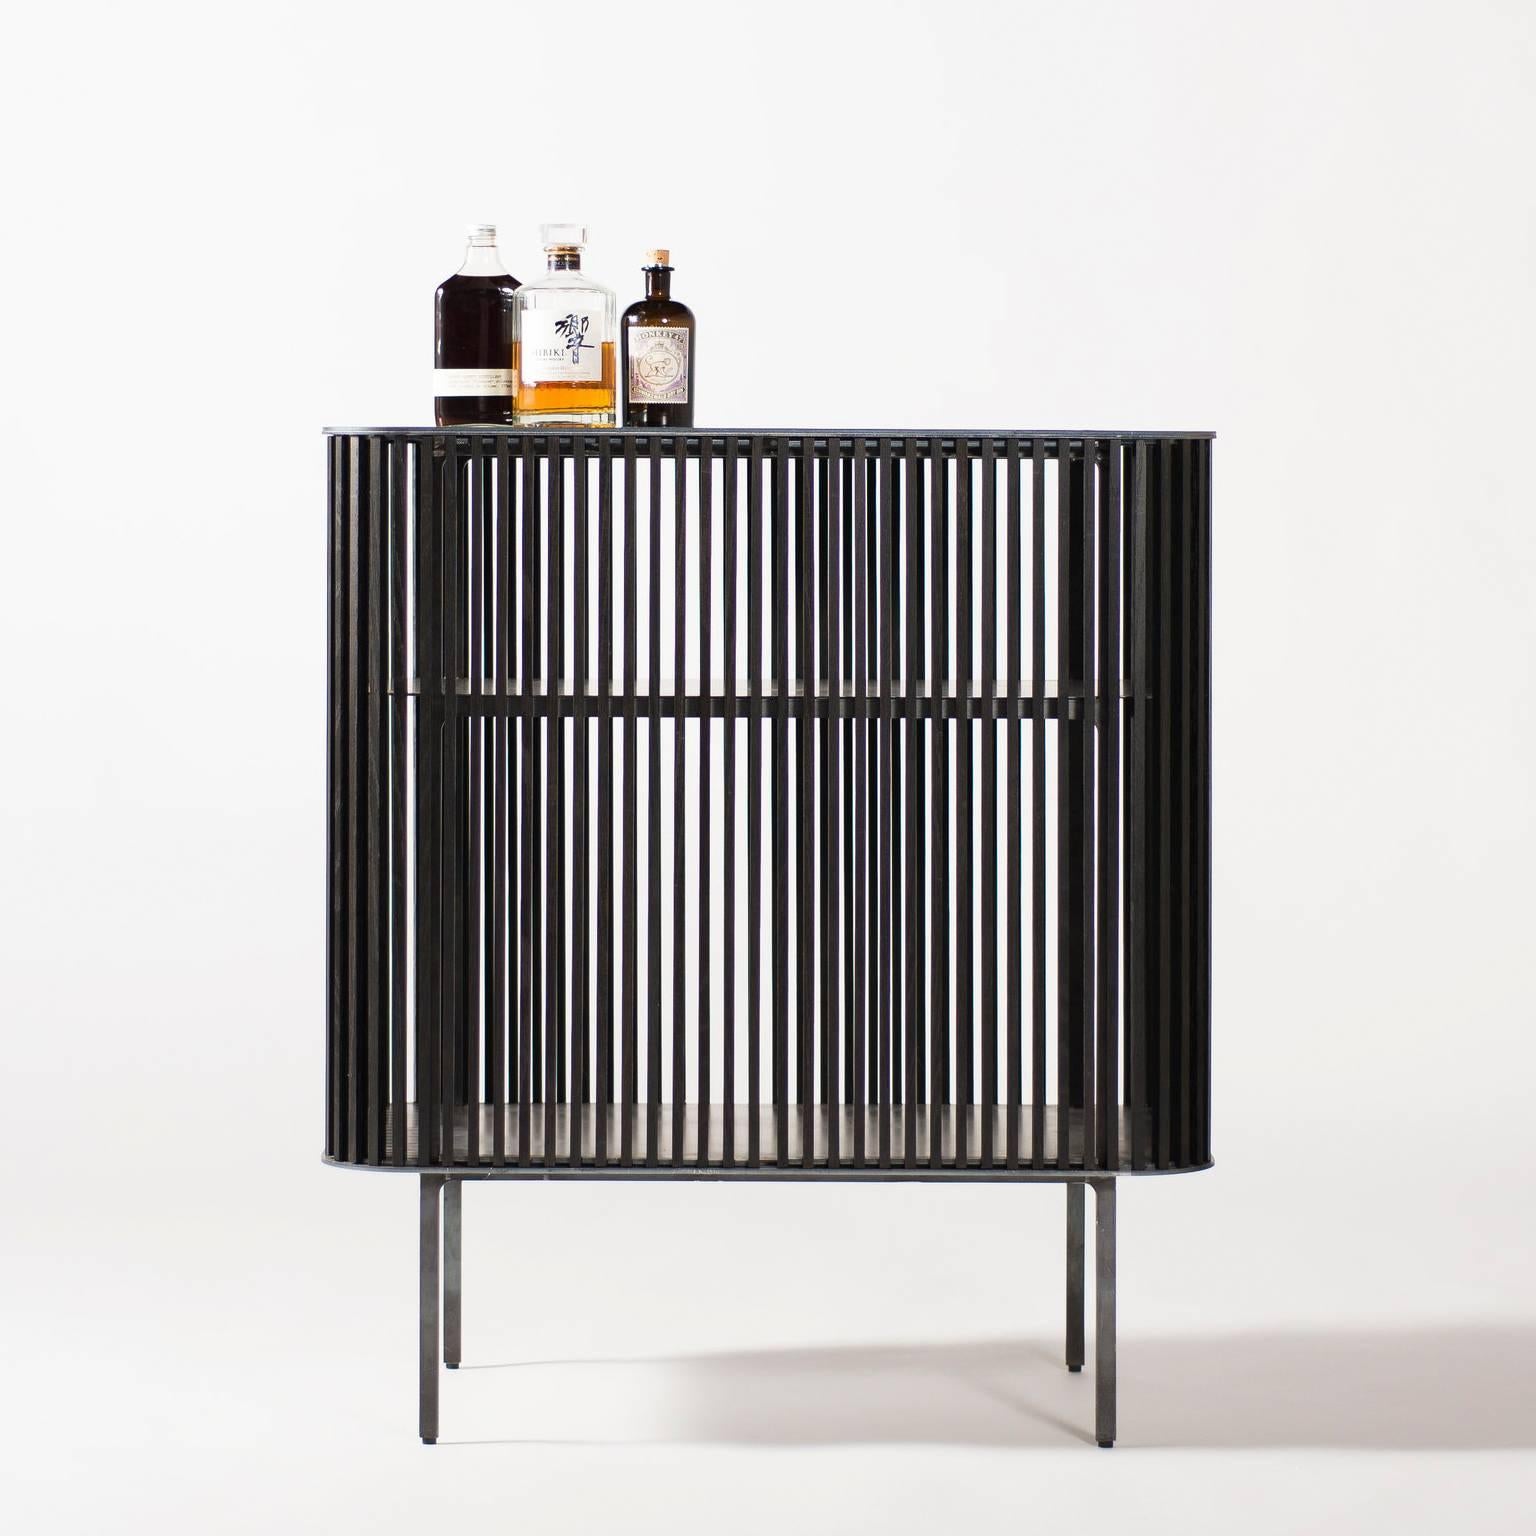 Bar by Klein Agency.

A beautiful contemporary bar in wood, leather, and steel. 

Be it in the gentleman’s corner of your apartment or center stage in your living room, the Bar in its simplicity, serves as a humble vessel for your most precious